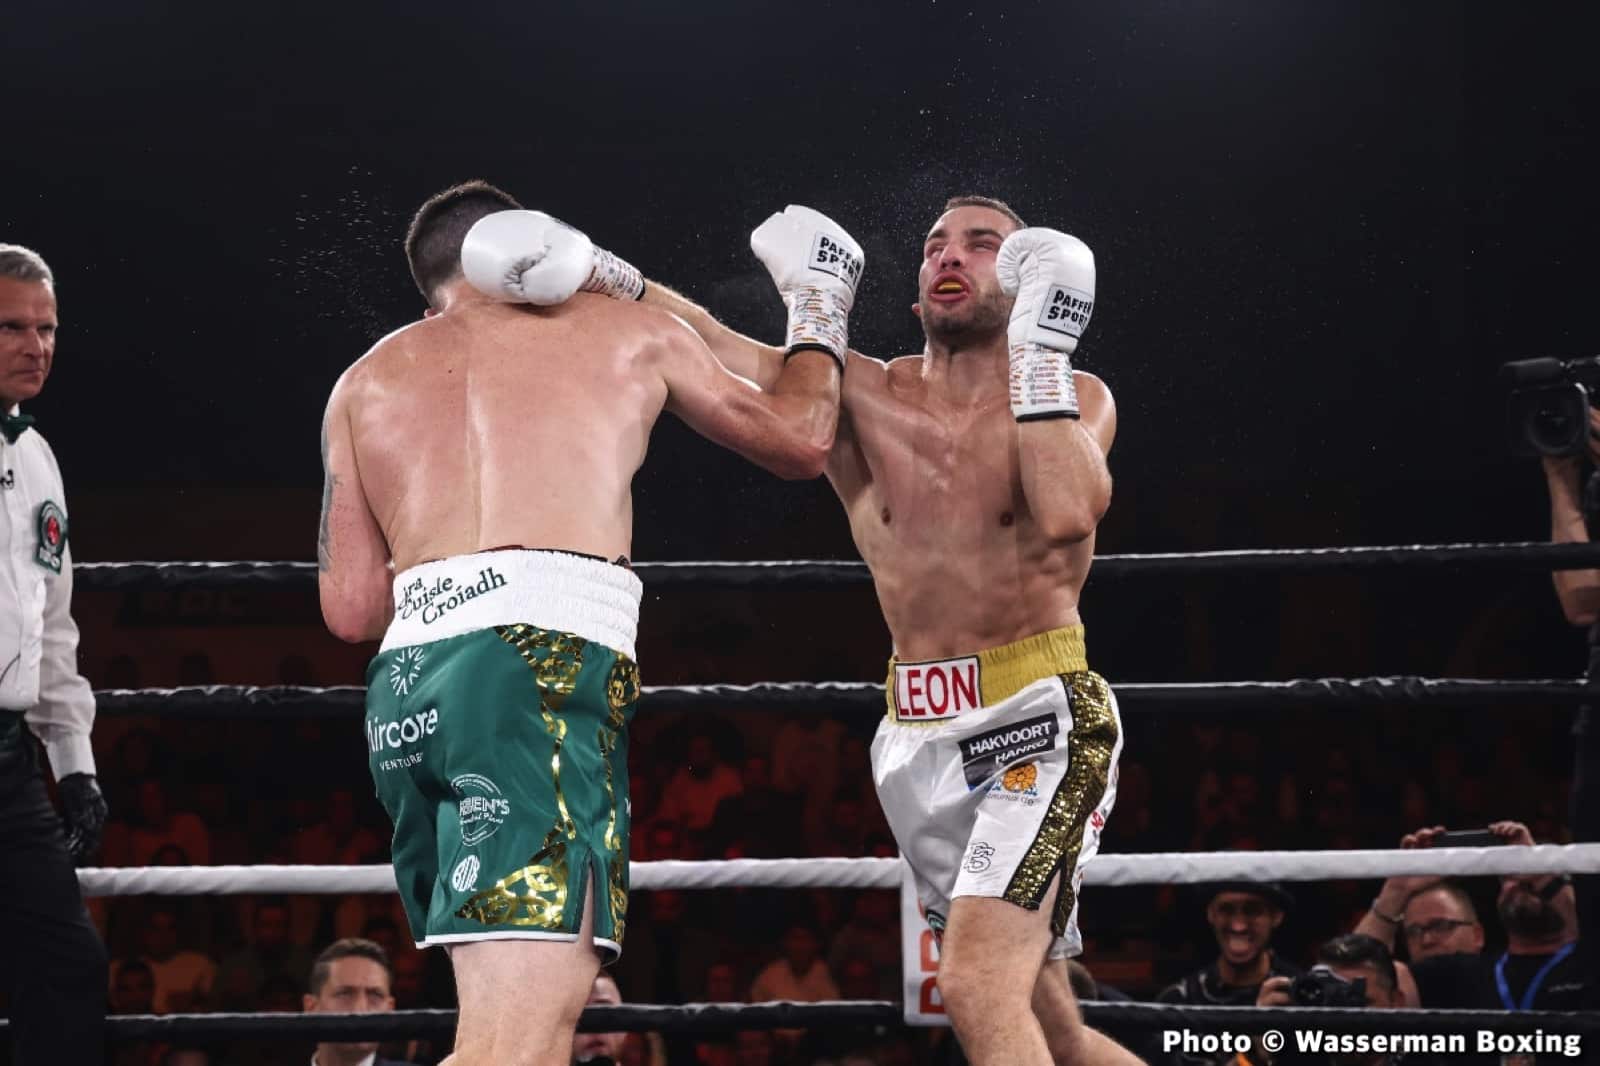 Image: Boxing Results: Leon Bunn KO’d by Padraig “The Hammer” McCrory in Germany!